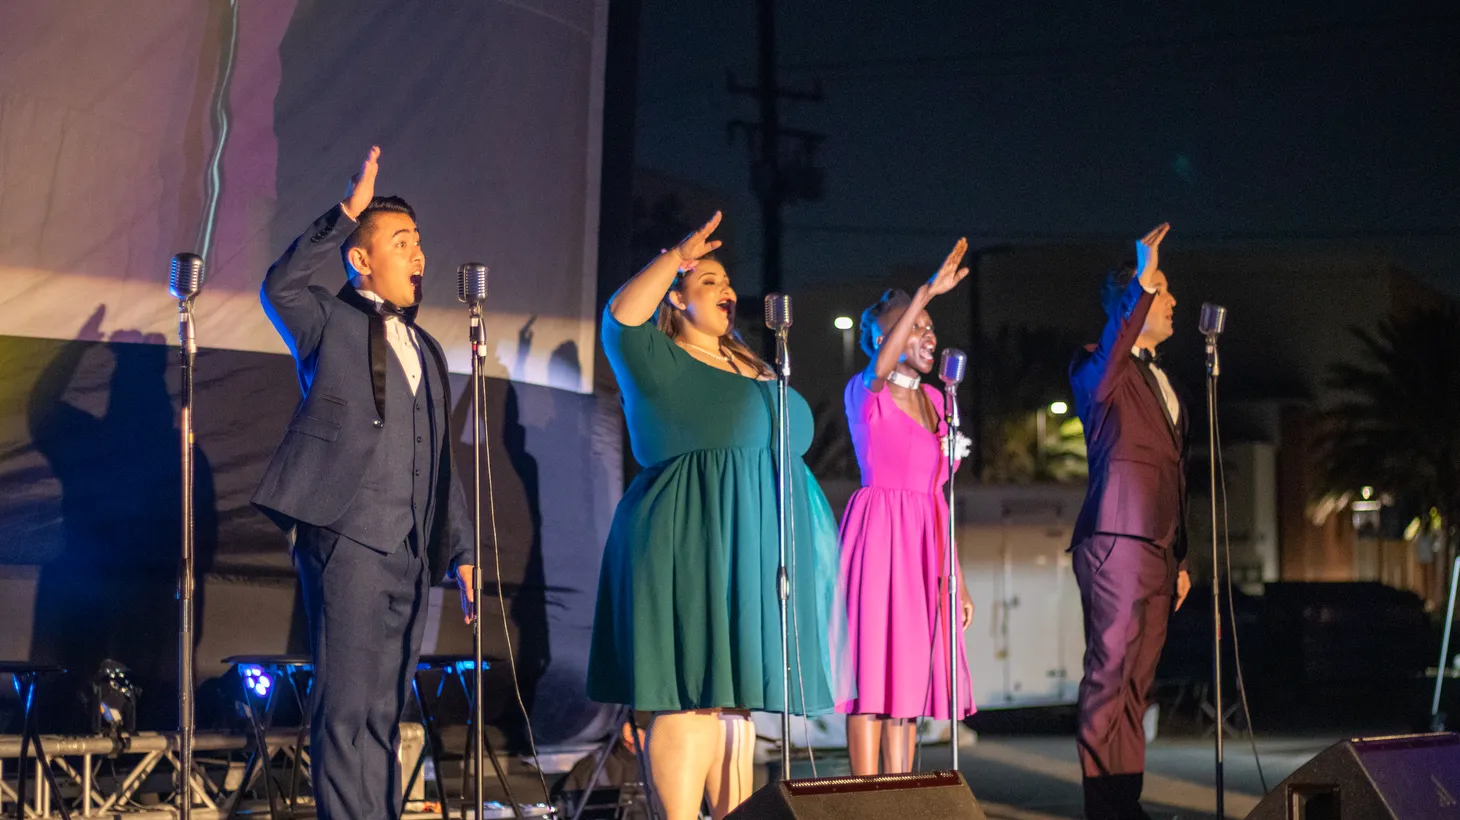 Aaron Jacobs (far right) performs with his 13-piece band, The Swing Tones, at Summer Swing Nights. Though normally the event takes place in the Zimmerman Automobile Driving Museum, Jacobs and The Swing Tones performed a drive-in show at El Camino College in June 2021, at the peak of the pandemic.